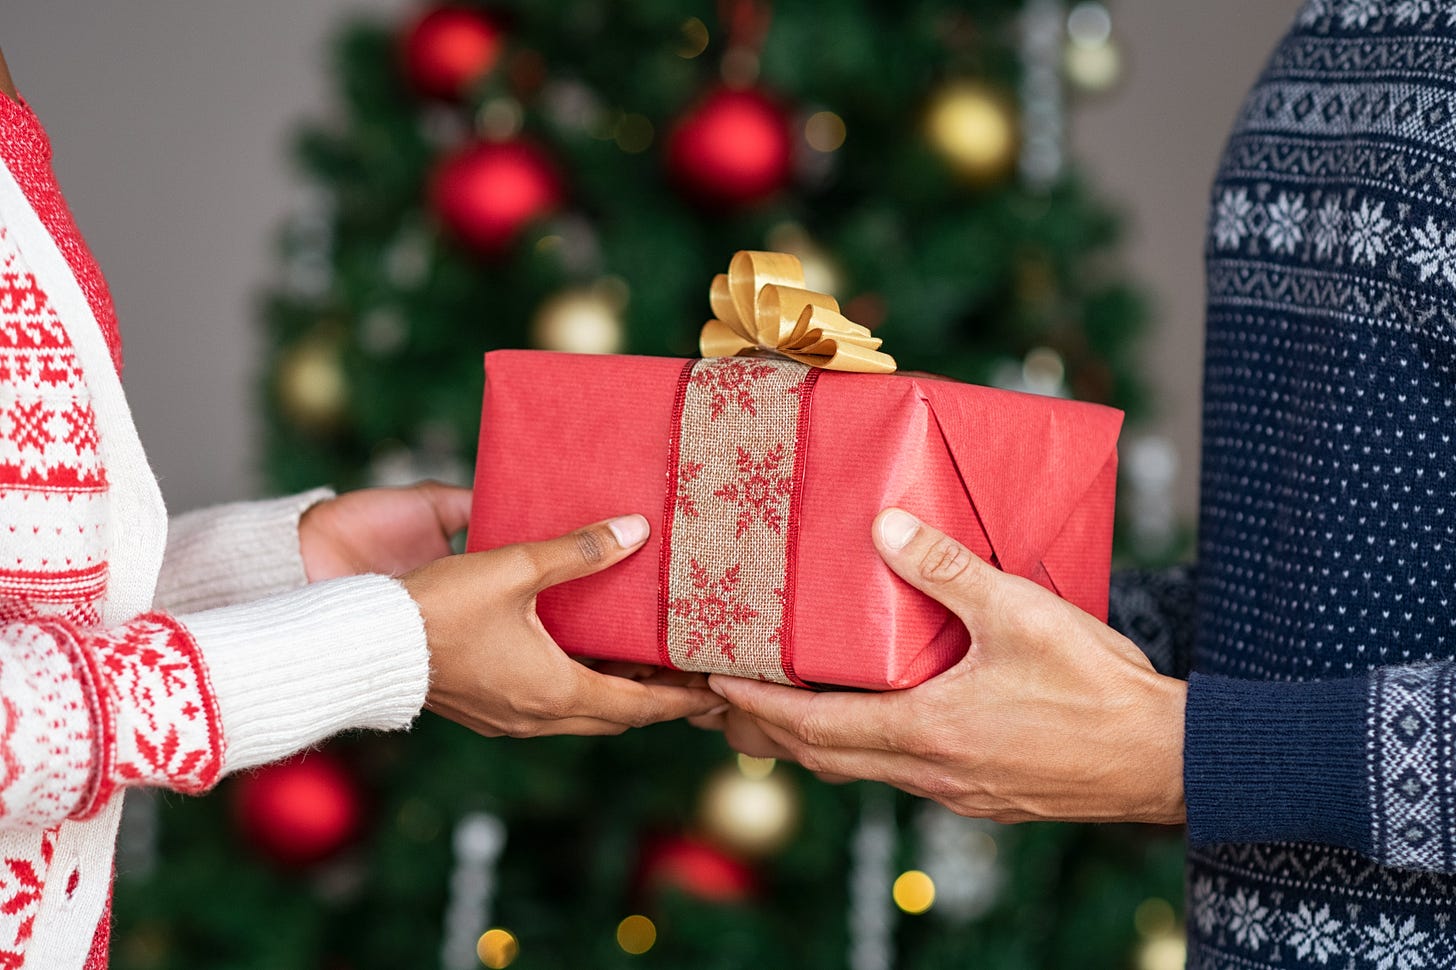 When to give gifts in a new relationship and what to get them, according to  experts | The Independent